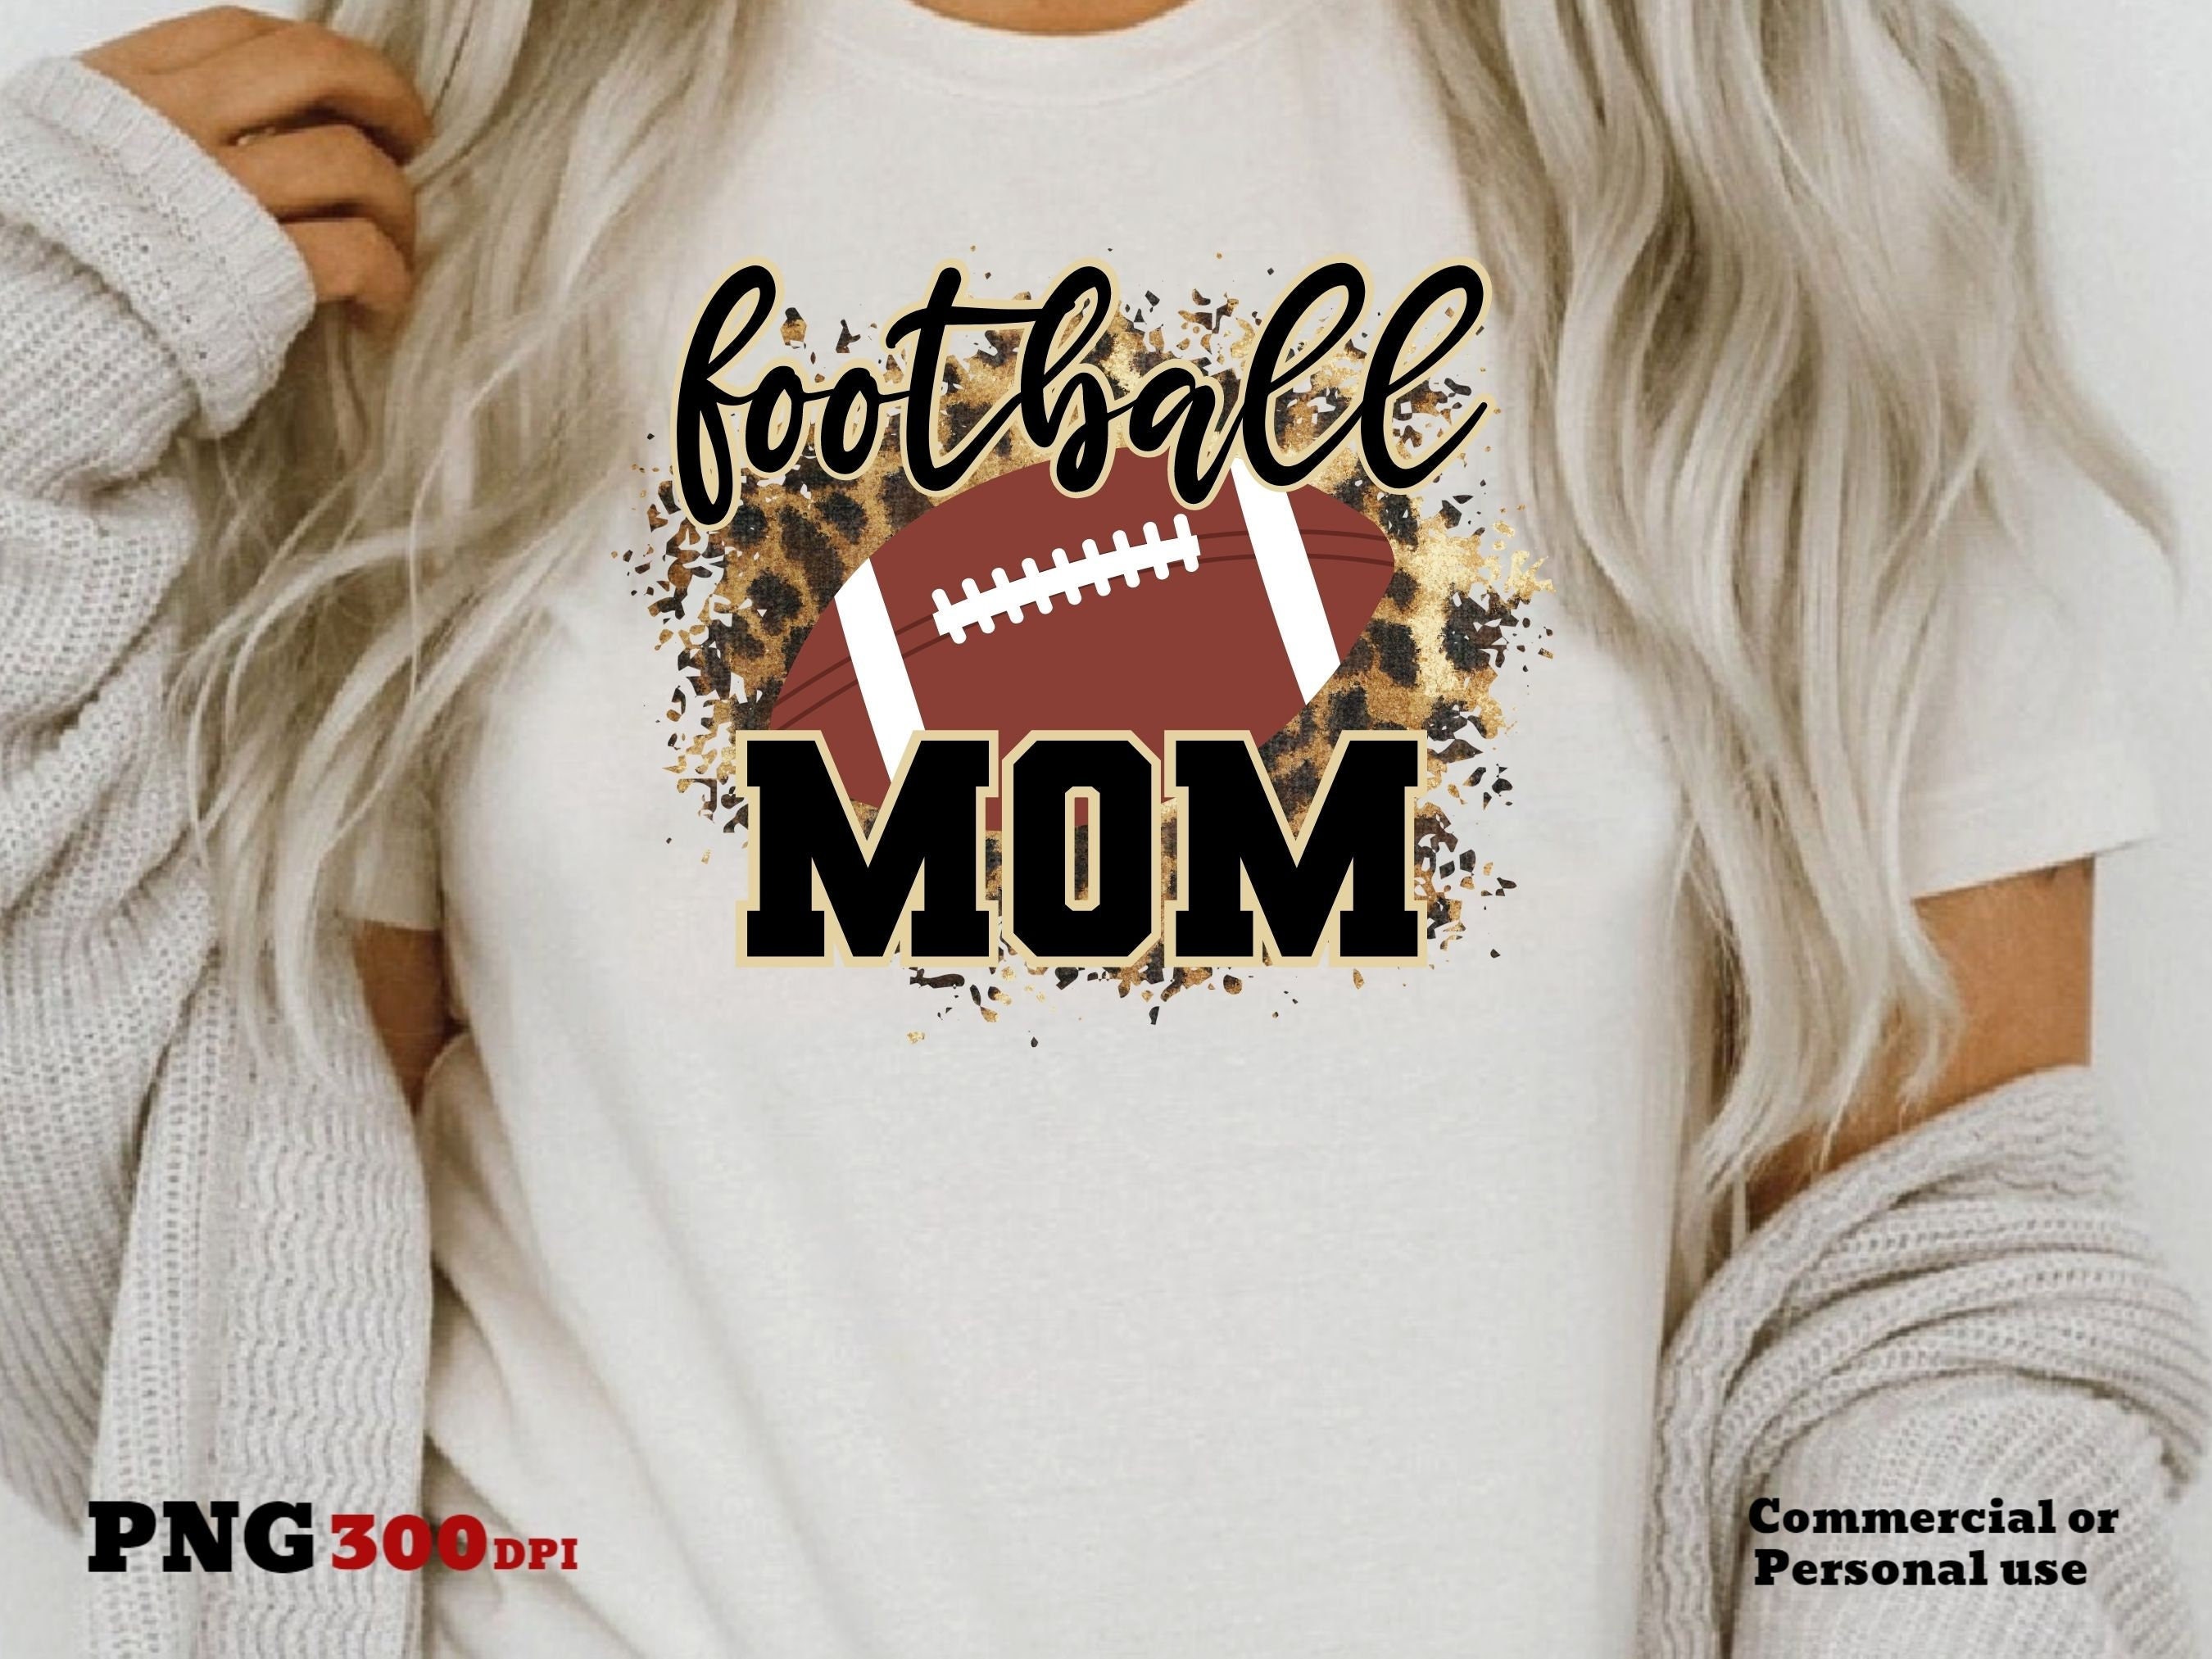 Football Mom PNG, Leopard Print, Cheetah, Game Day, Touchdown, Sports Mom,  Mama, Sweatshirt, Shirt Sublimation PNG Download File Design - Etsy